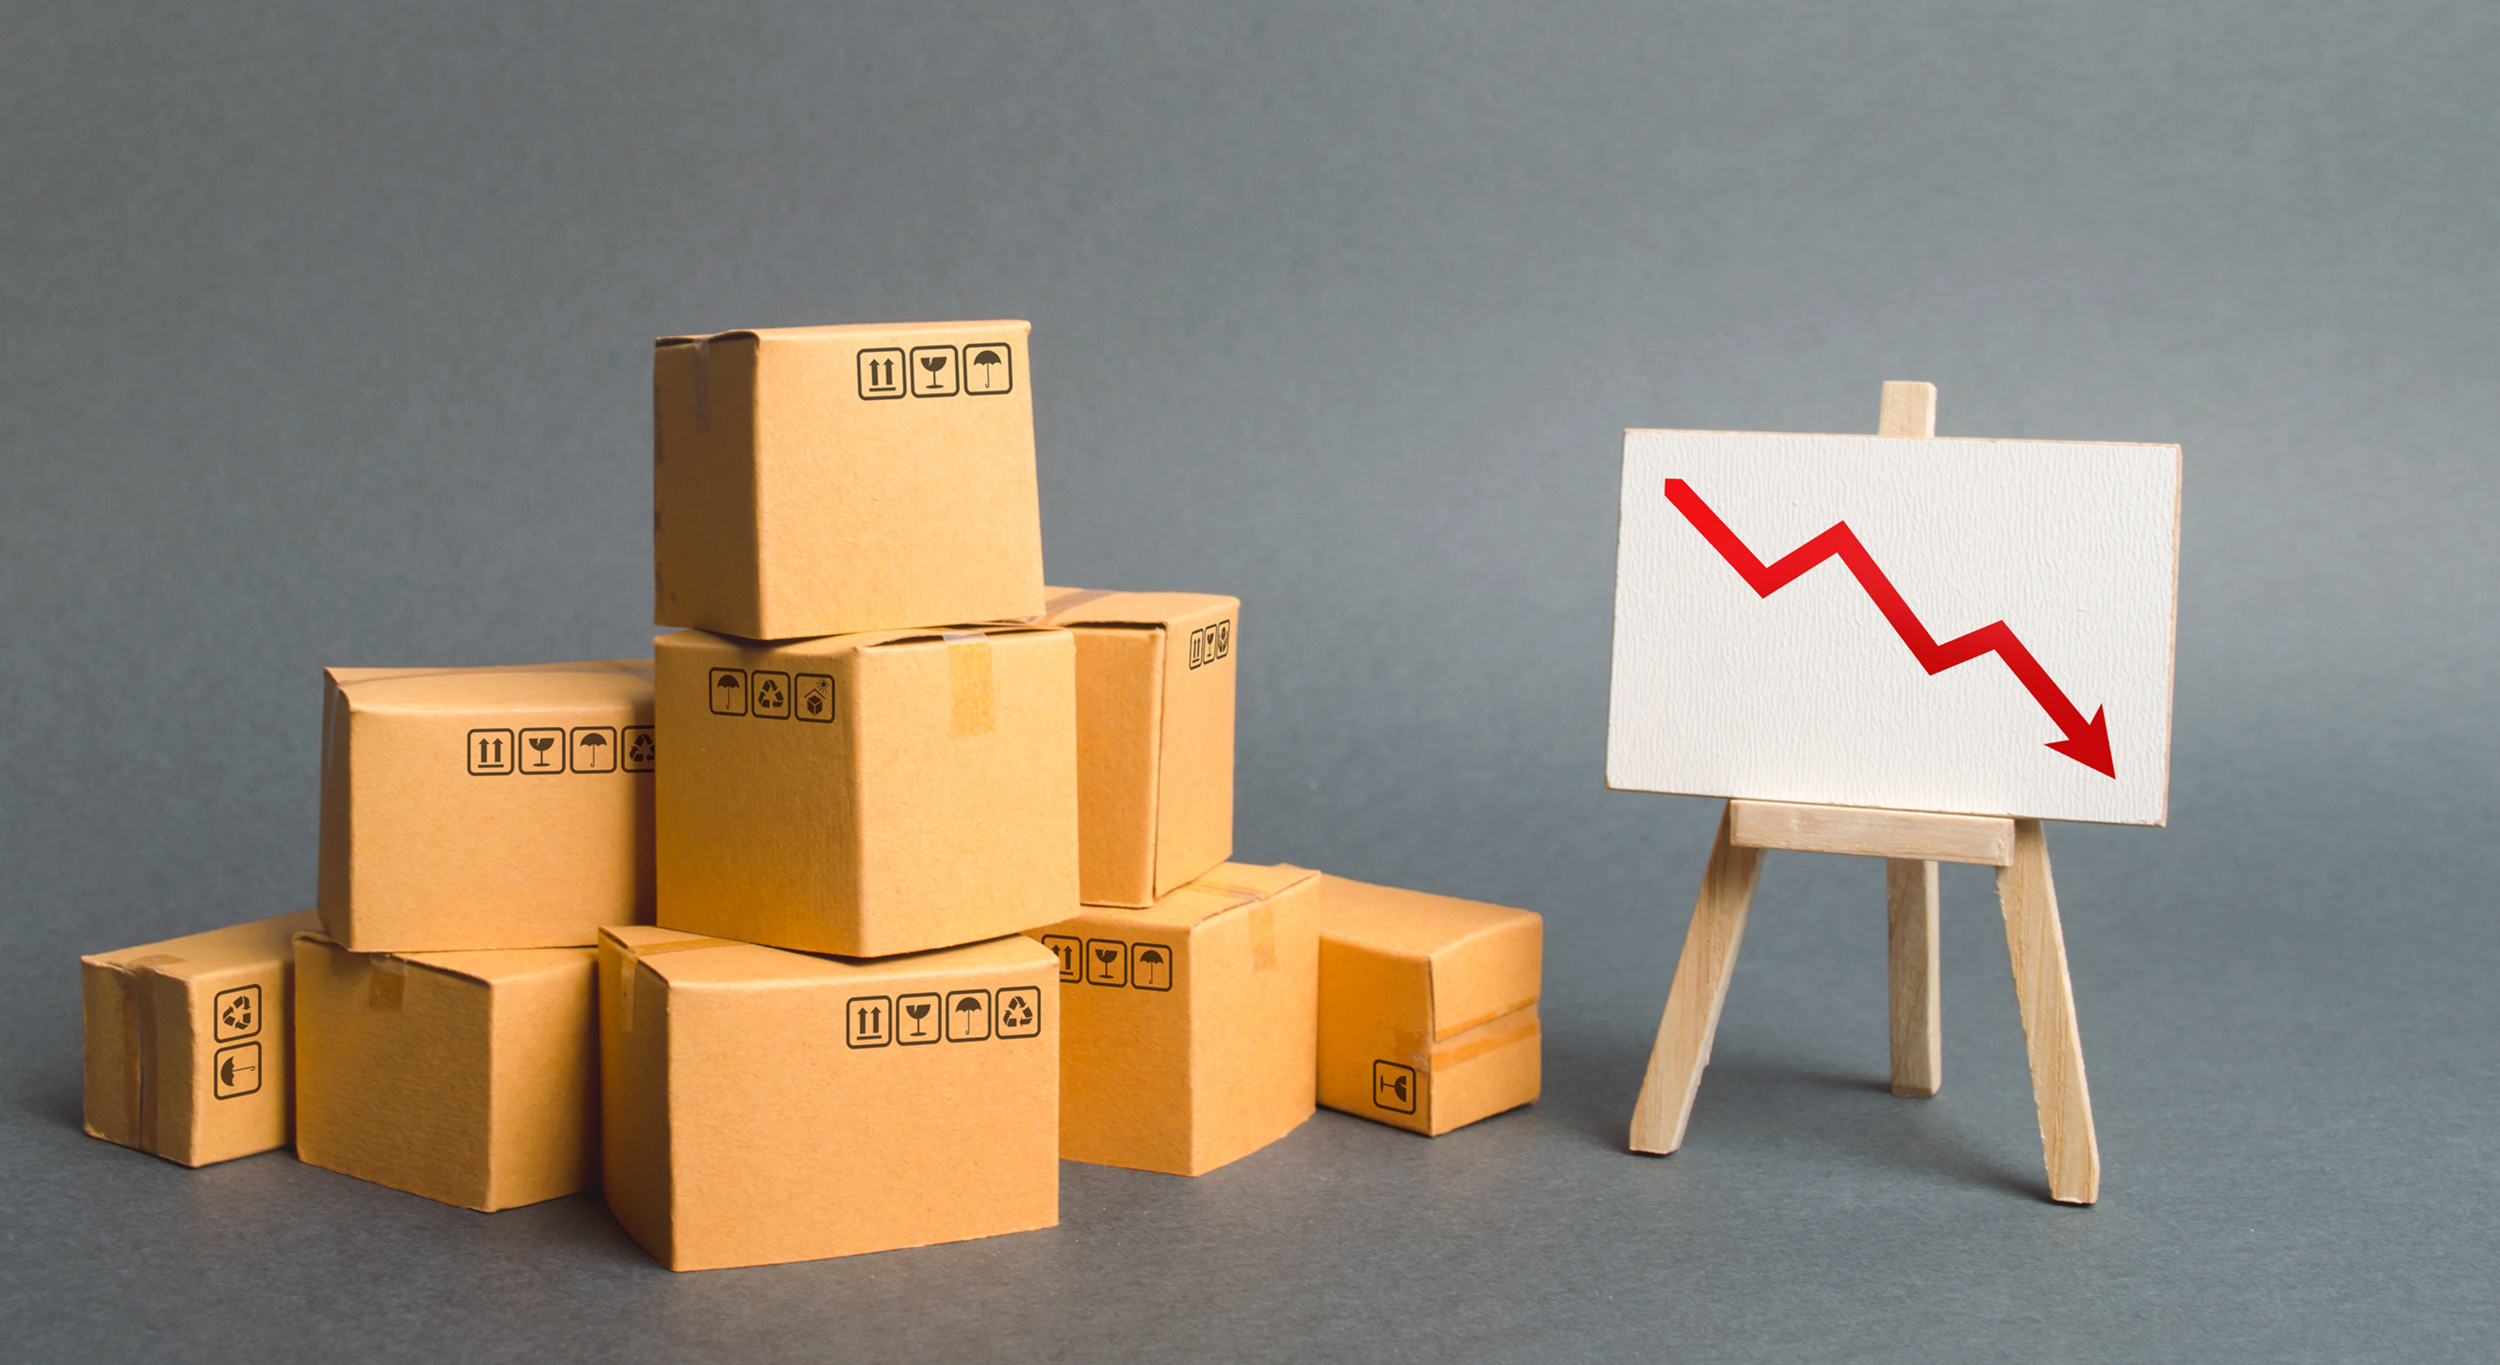 A pile of cardboard boxes and easel with red arrow down. Decrease in the quality, price, quantity and competitiveness of goods and products. Concept drop in industrial production, sales fall.